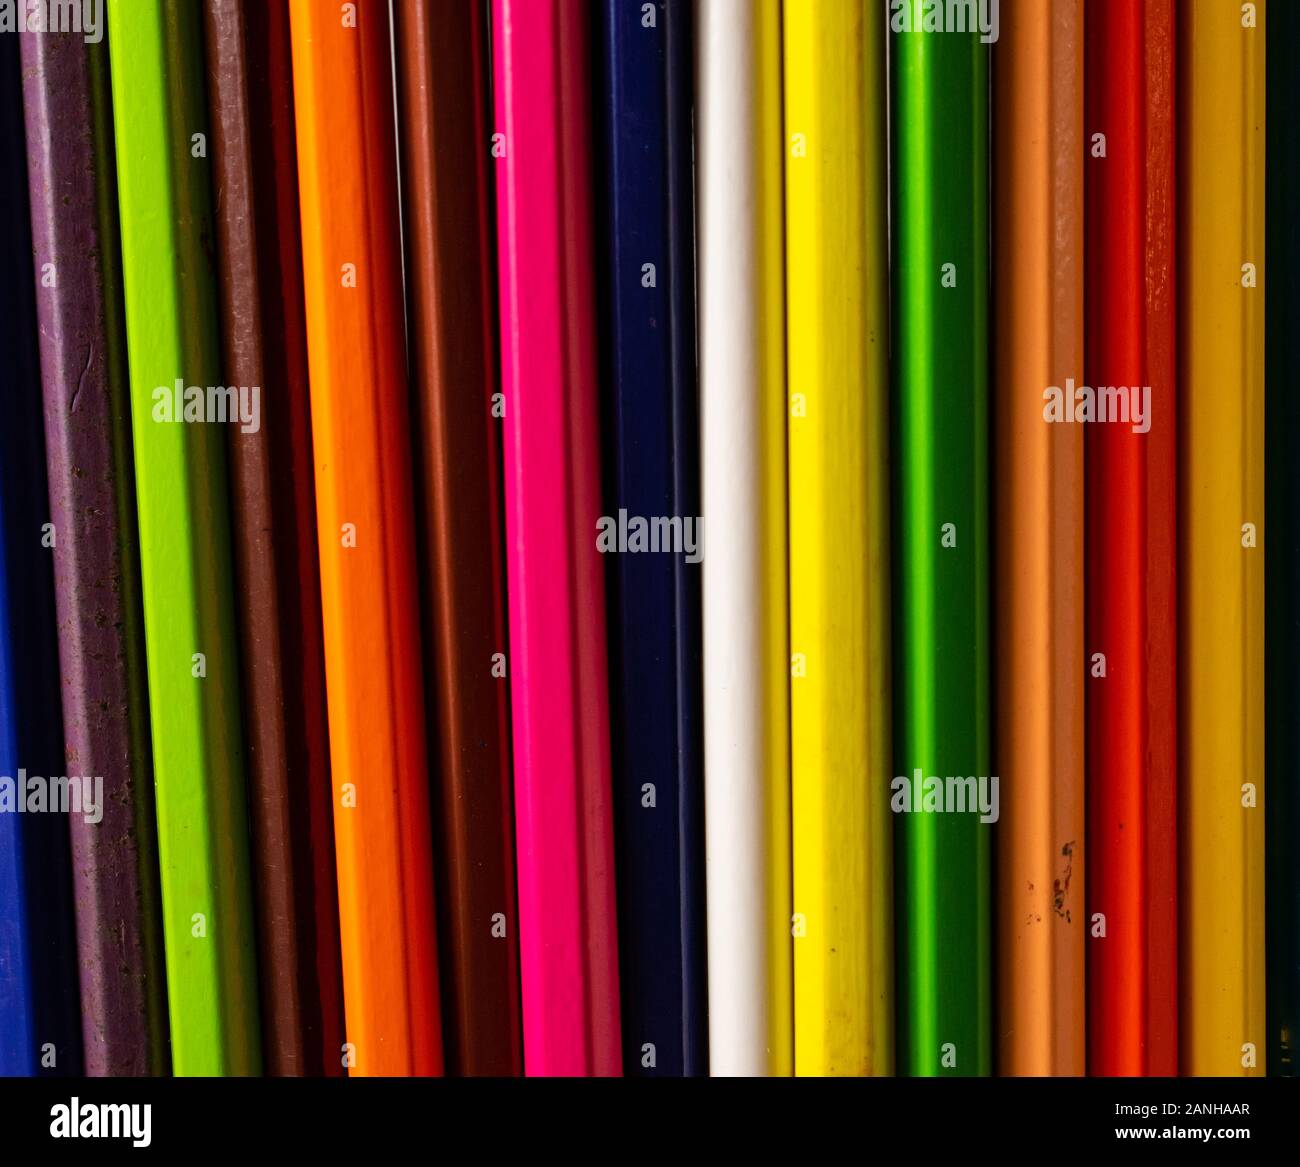 Different colors of pencils, in a straight line pattern. Colored crayons arranged in a meaningful way. Stock Photo